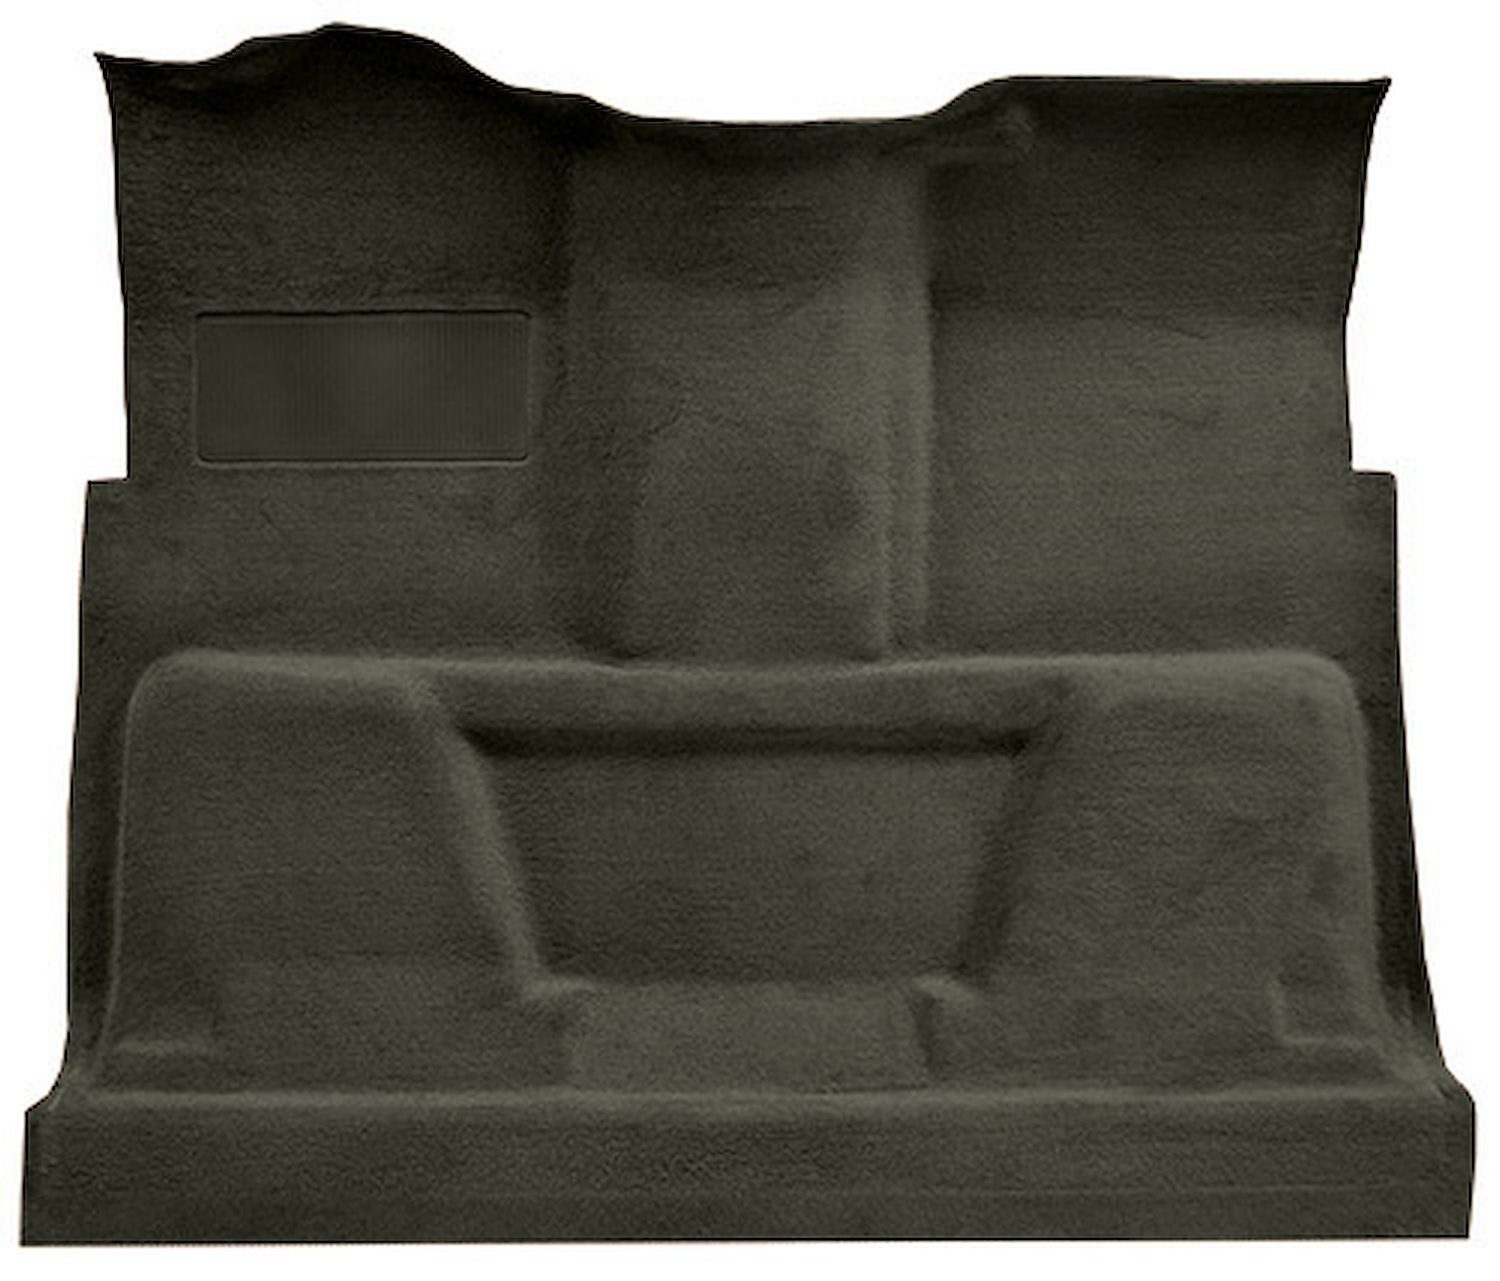 Molded Cut Pile Carpet for 1975-1980 GM C Series Regular Cab Trucks w/TH350 or 3-Speed [OE-Style Jute Backing, Charcoal]